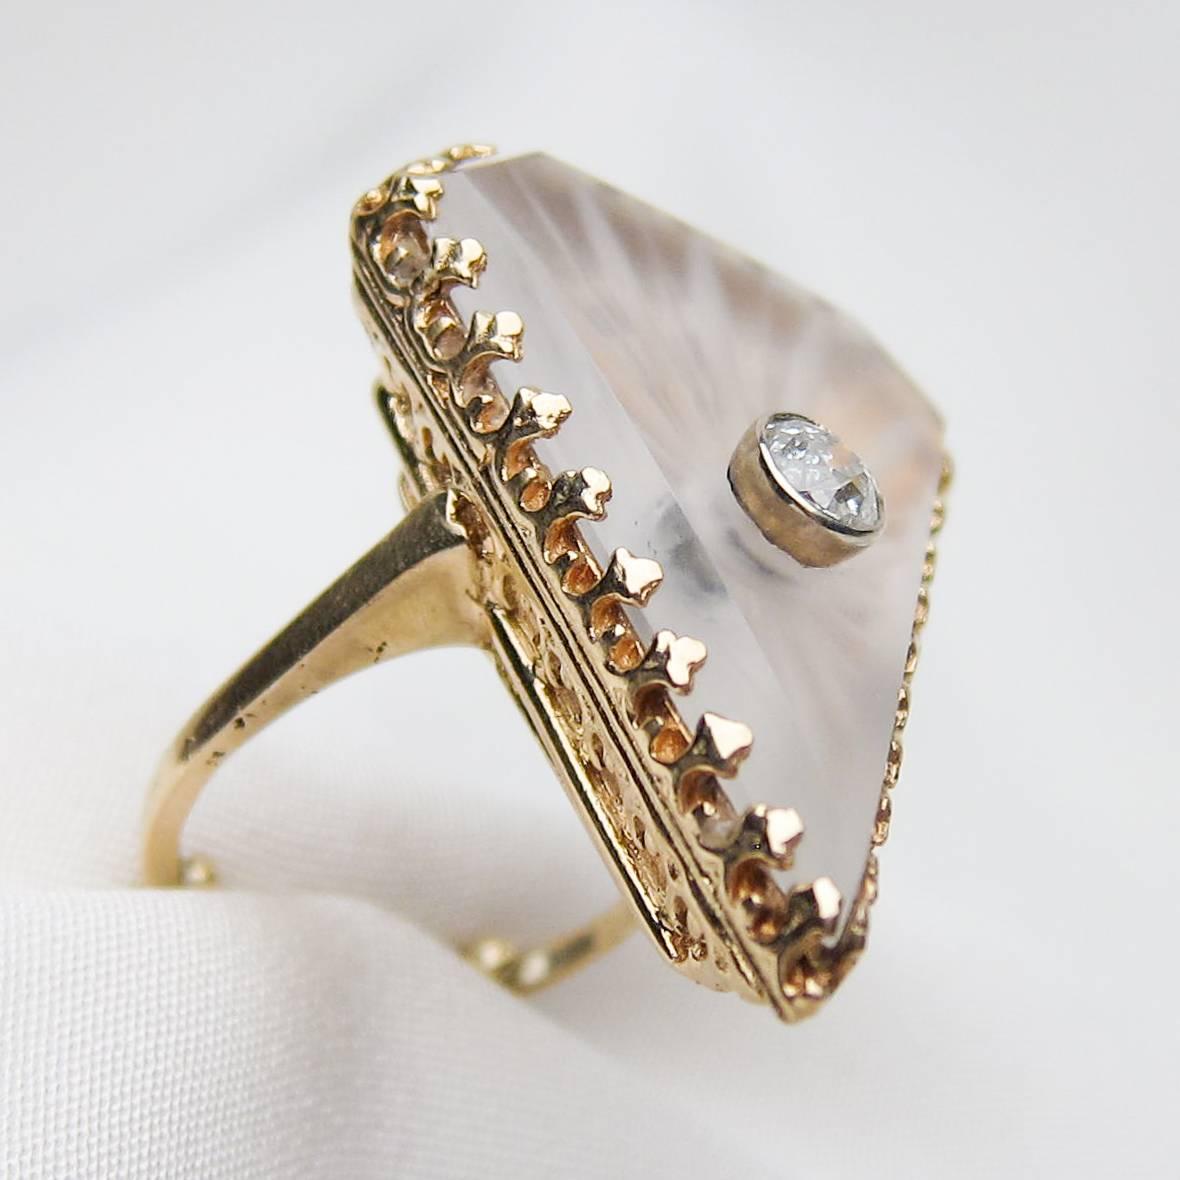 This is a fabulous rock crystal ring from the 1920s set in 14KT yellow gold and platinum. The mounting features a fleur-de-lis motif encircling a shield-shaped slice of rock crystal. In the center of the crystal sits a bezel-set old European-cut